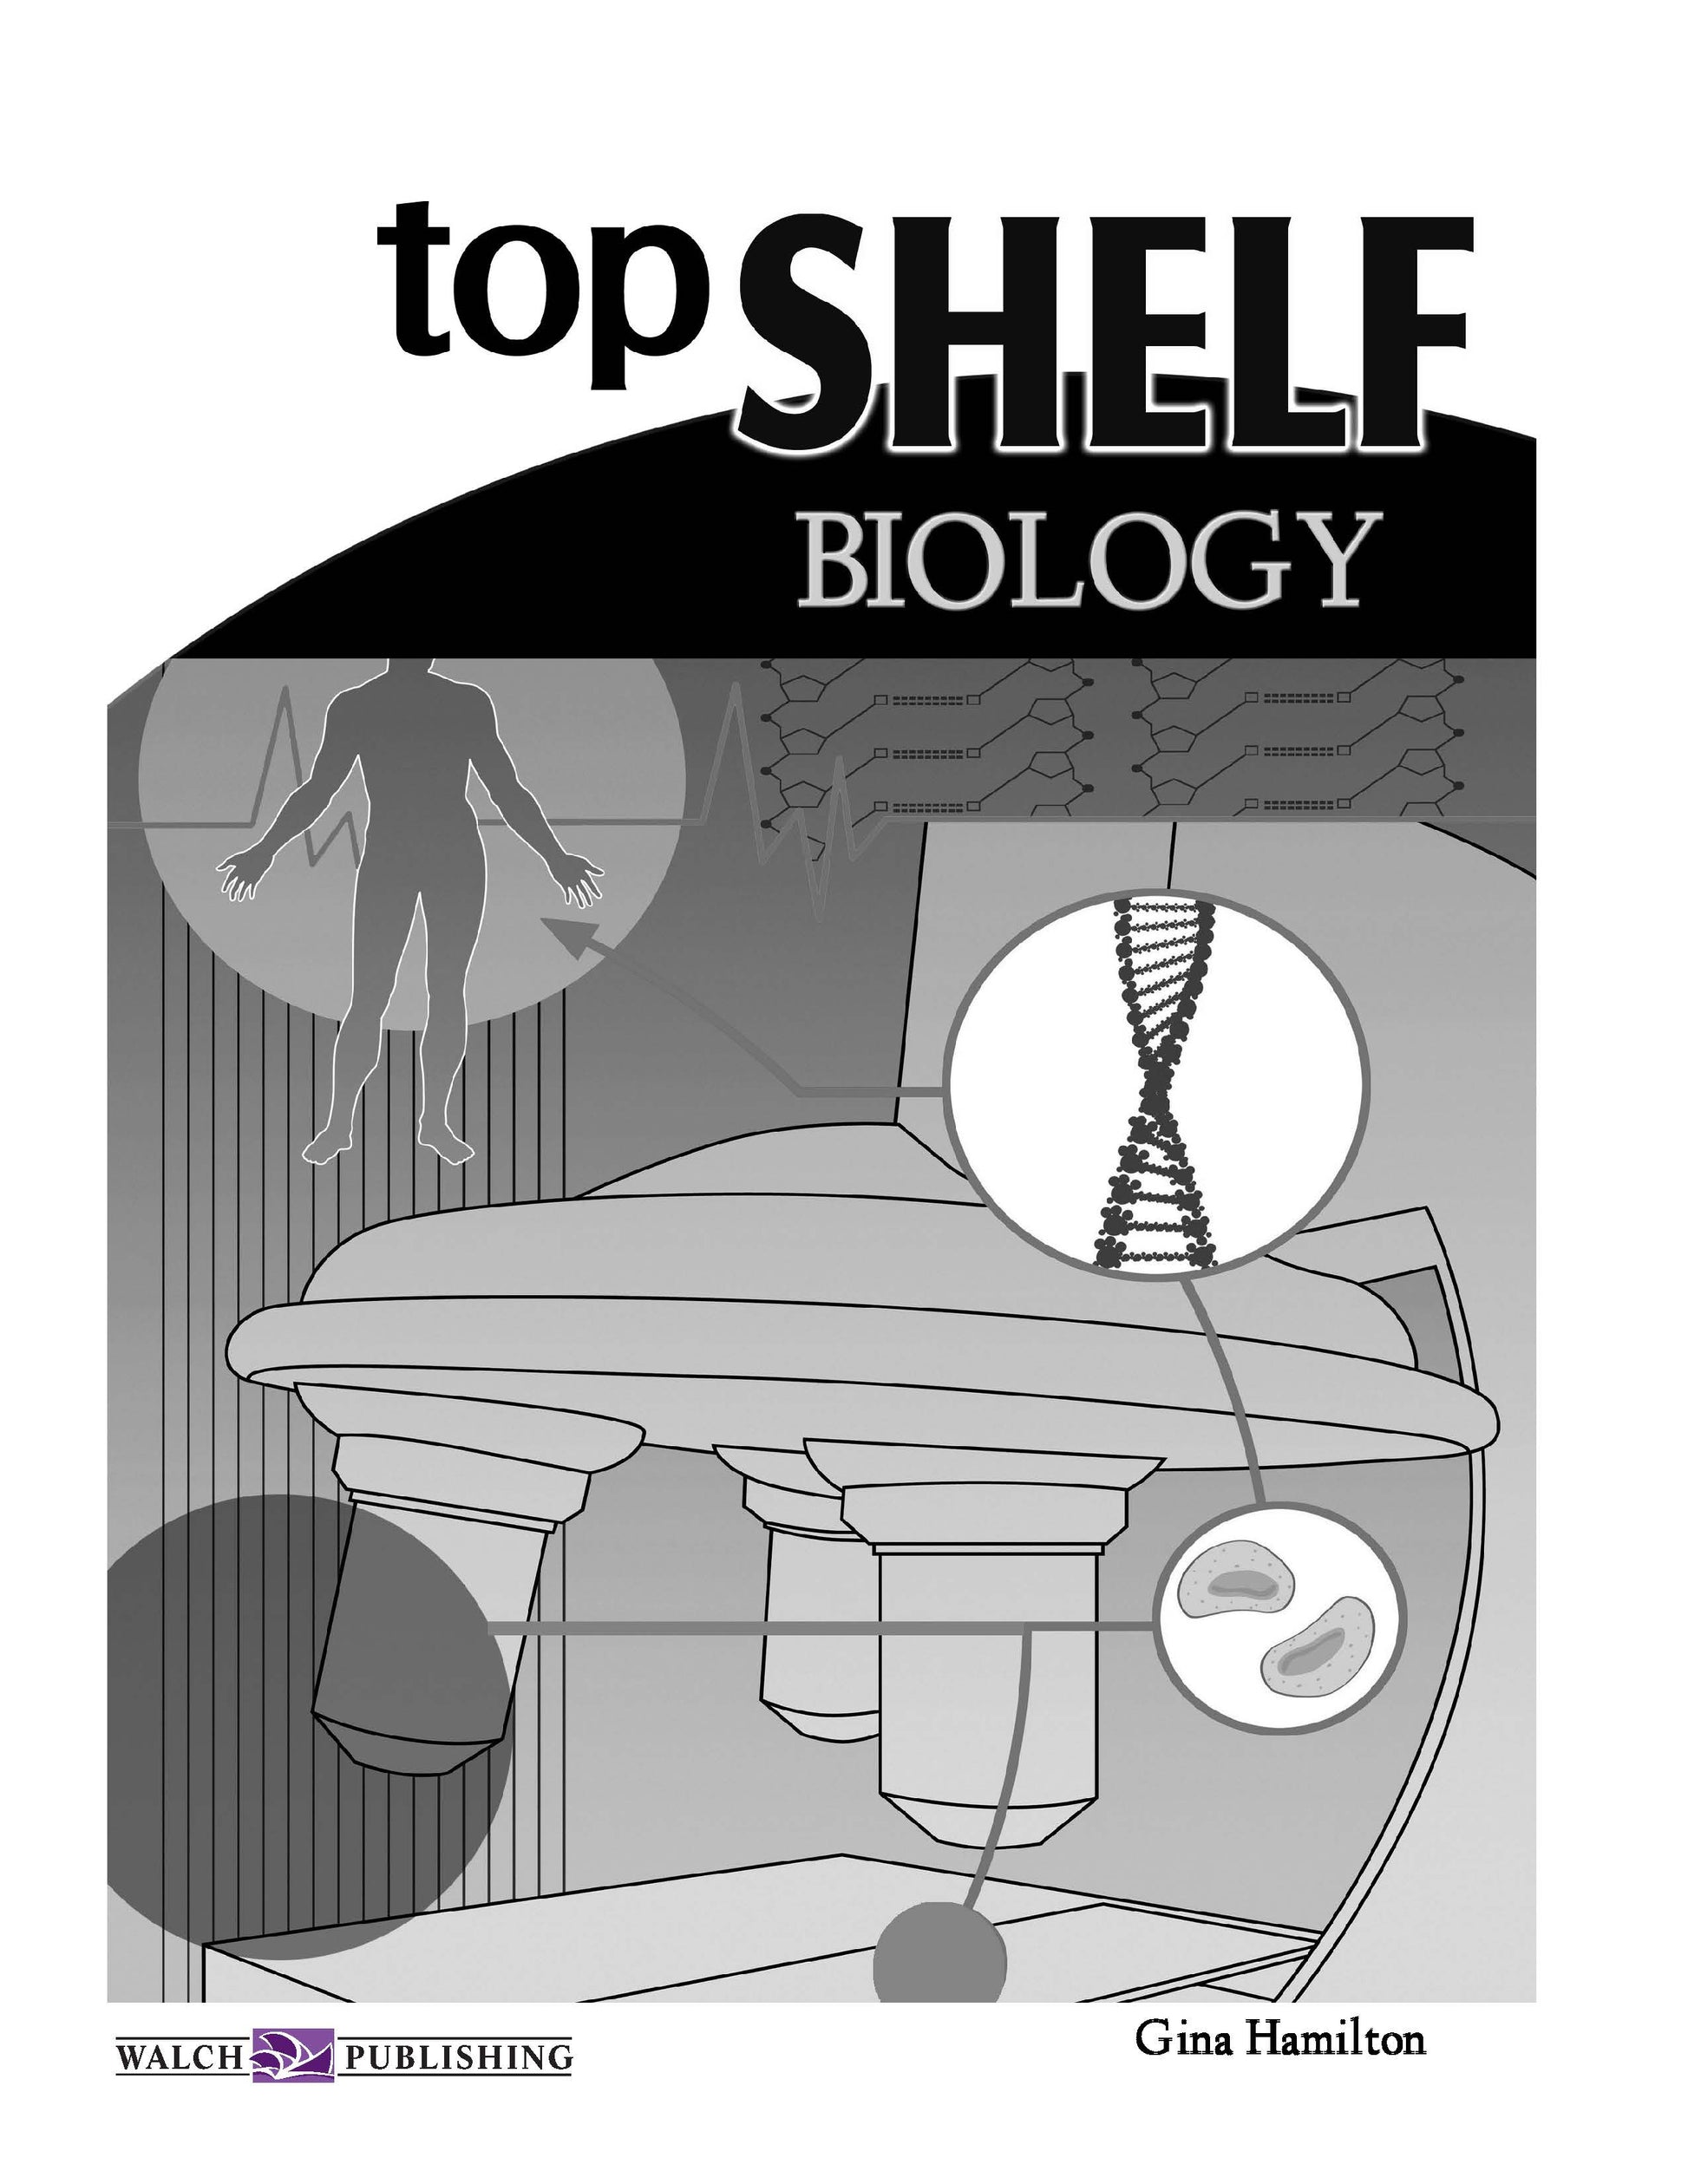 Topshelf Biology, Science, Biology, Physics, Chemistry, Earth Science, Teaching Resources, Poster, Bright Education Australia